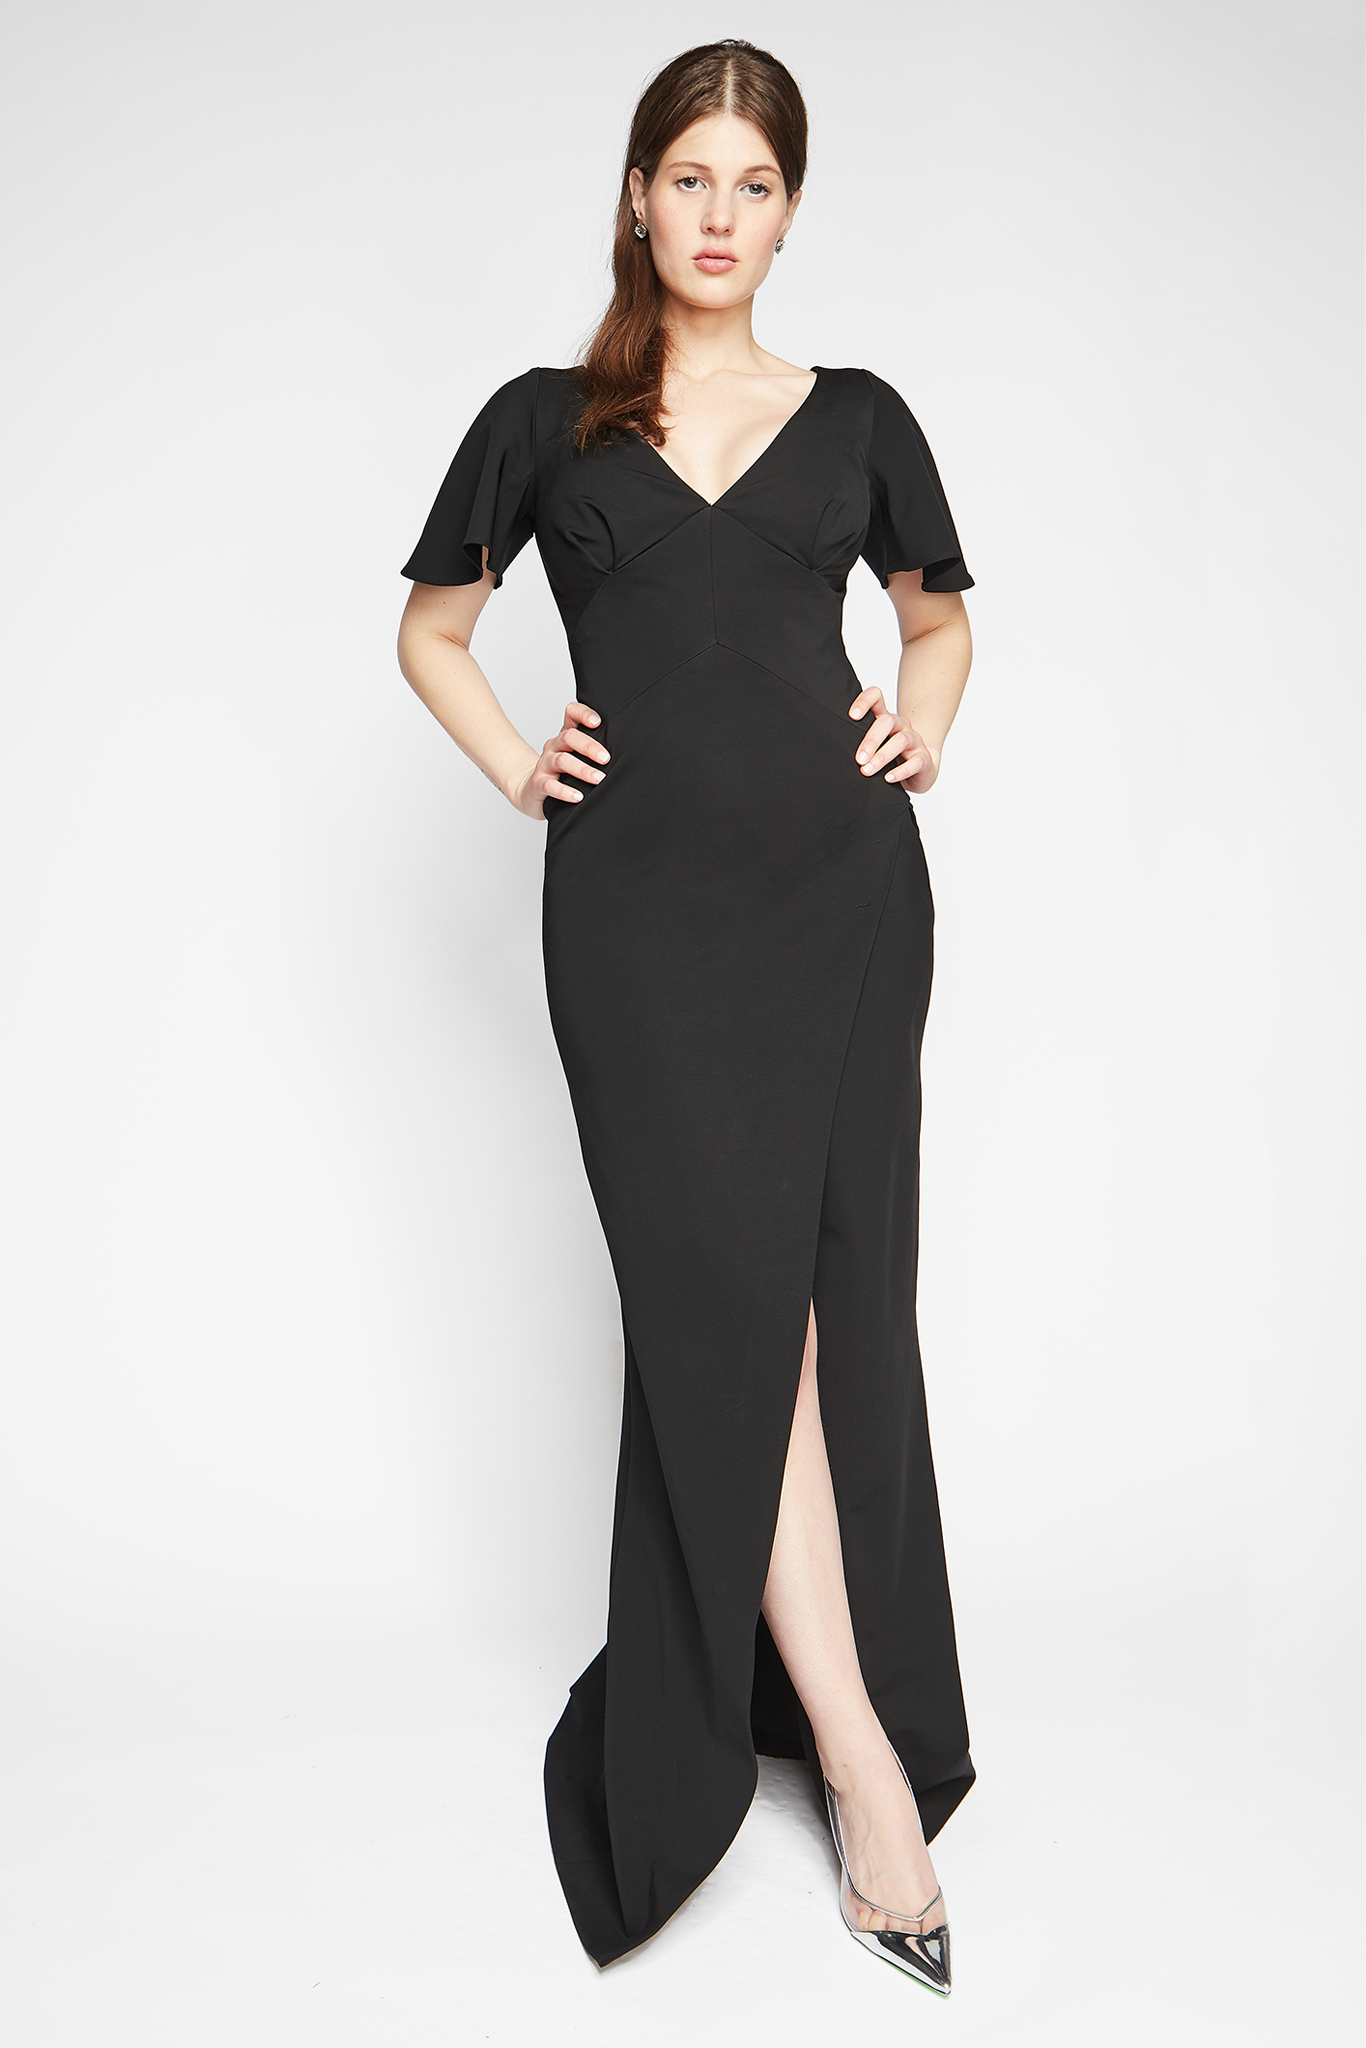 Front view of a woman wearing a fuller bust stretch jersey black evening gown with a plunging neckline designed by Miriam Baker.